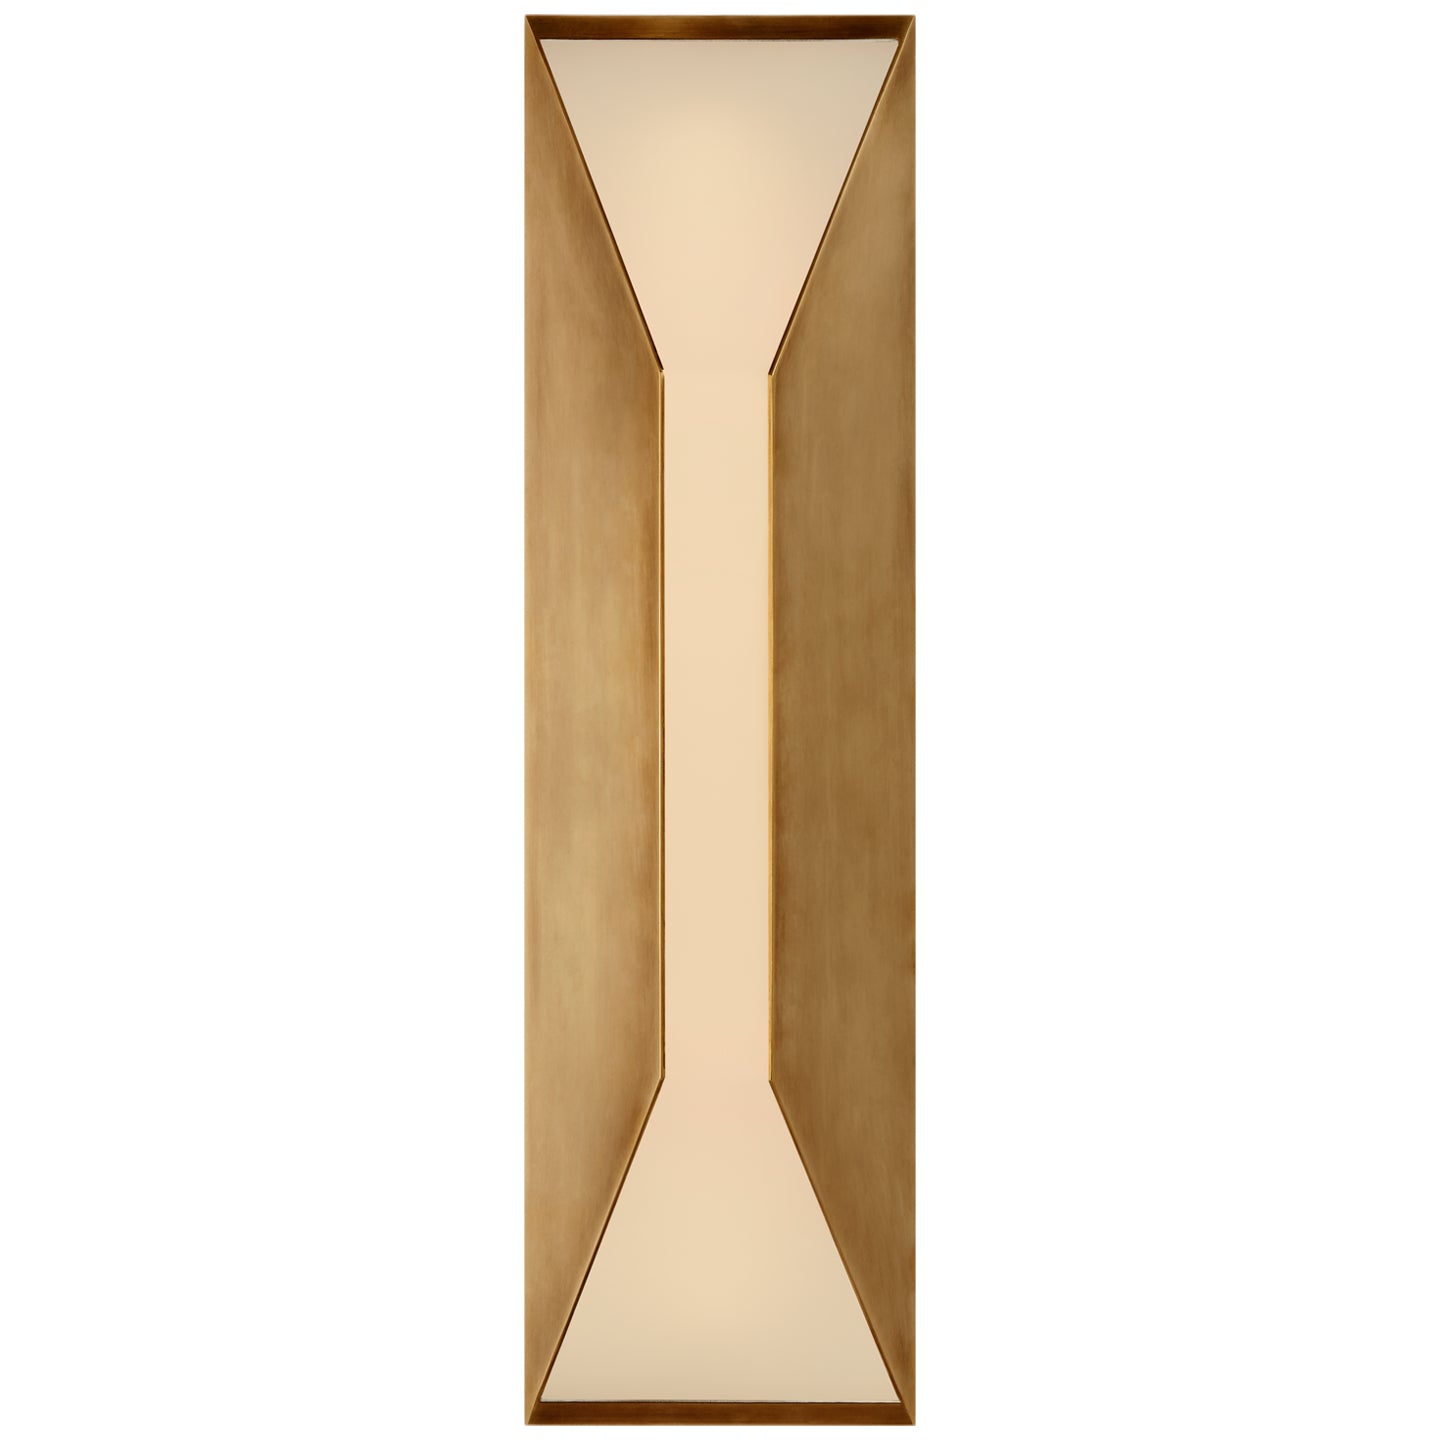 Visual Comfort Signature Canada - LED Wall Sconce - Stretto - Antique-Burnished Brass- Union Lighting Luminaires Decor